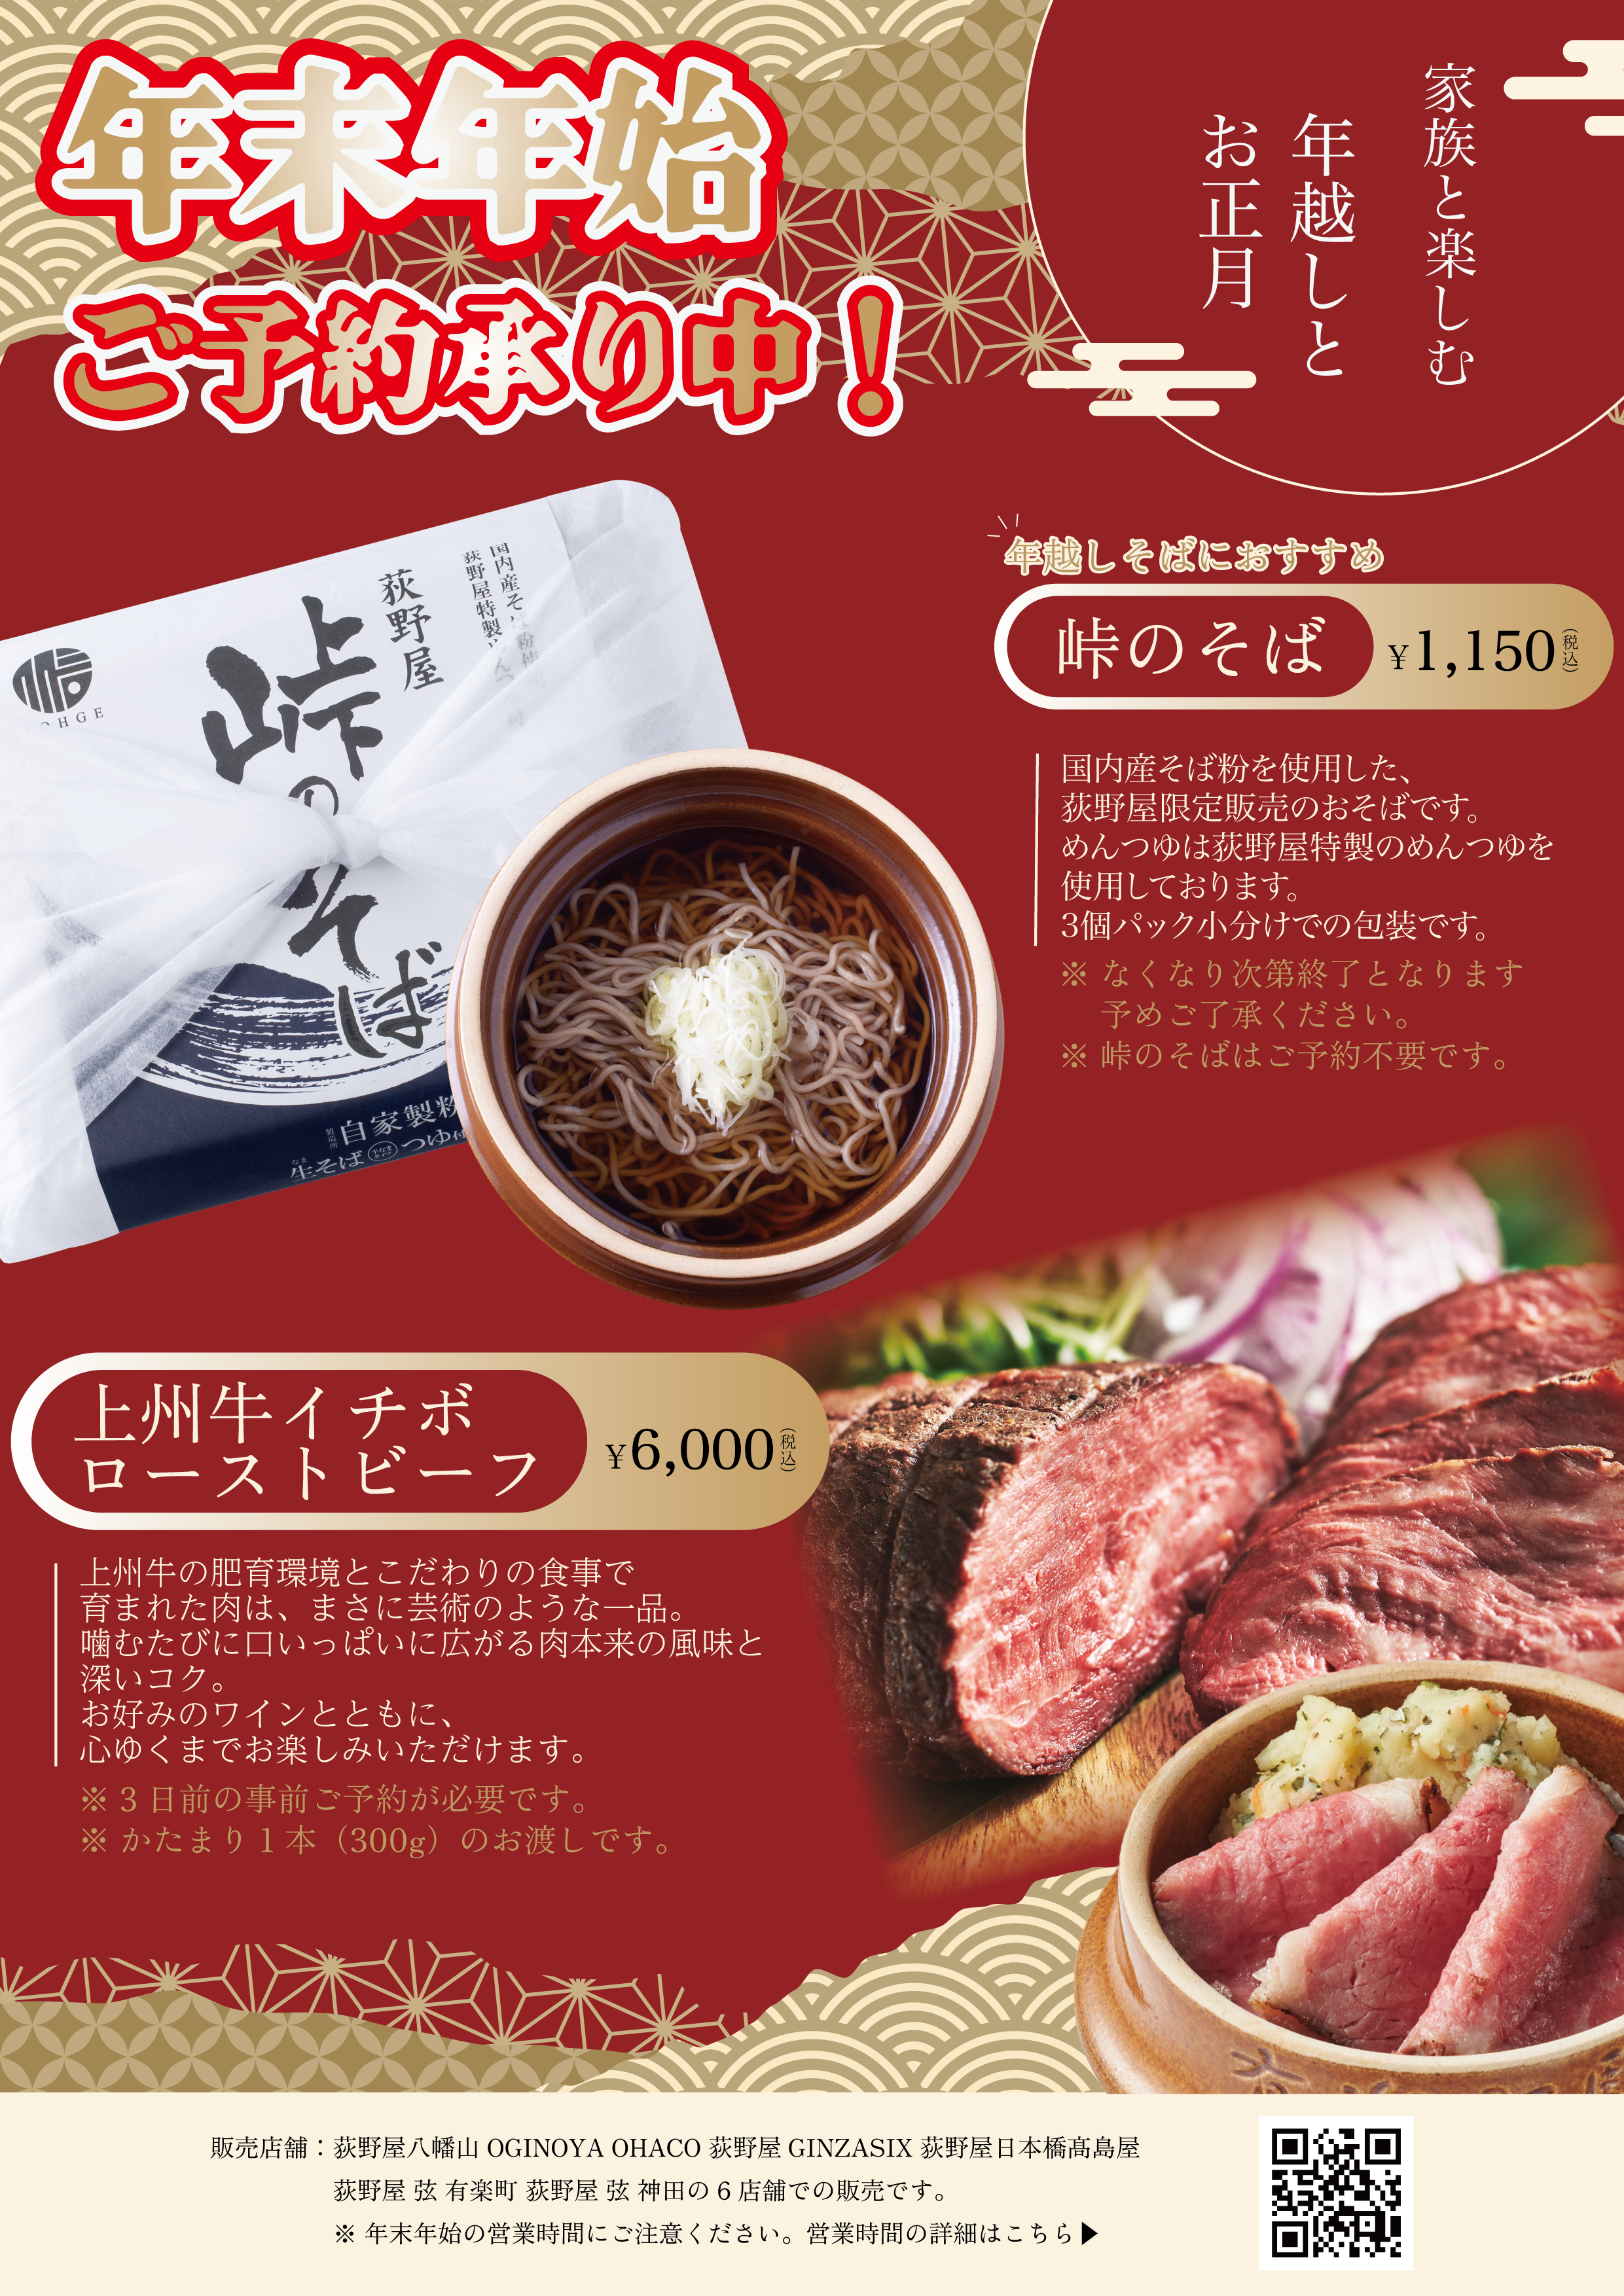 Year-end and New Year's Recommendation Roast Beef Pass Soba Noodles